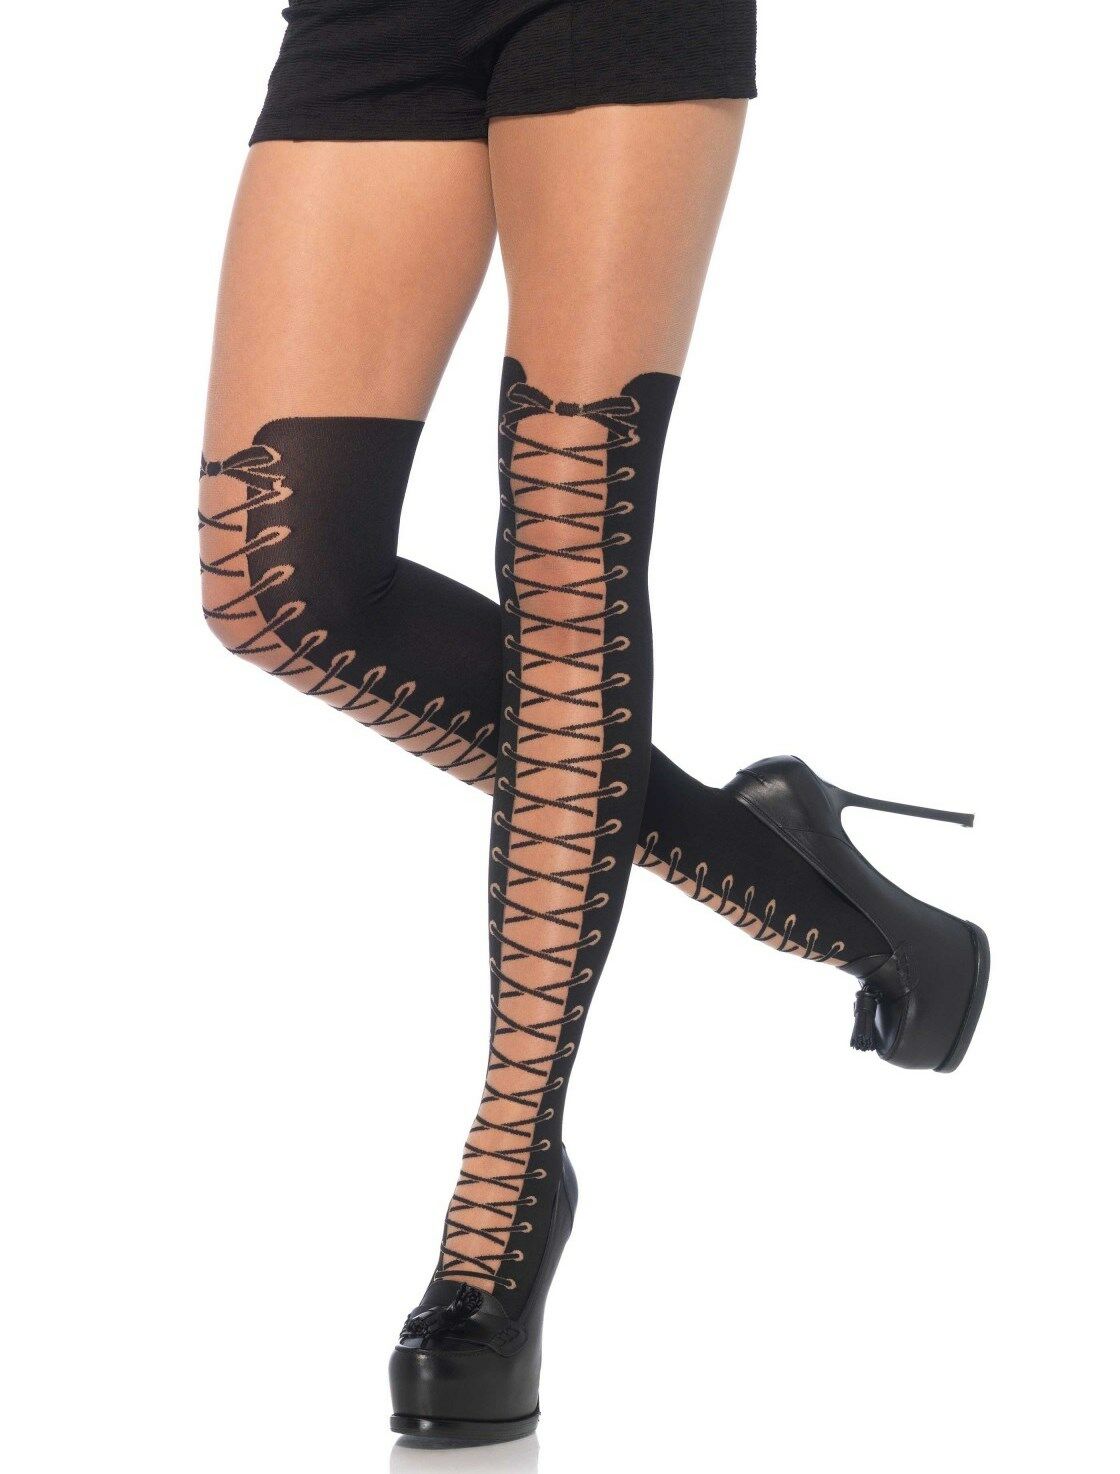 'All Tied Up' Nude Tights with Faux Black Boot